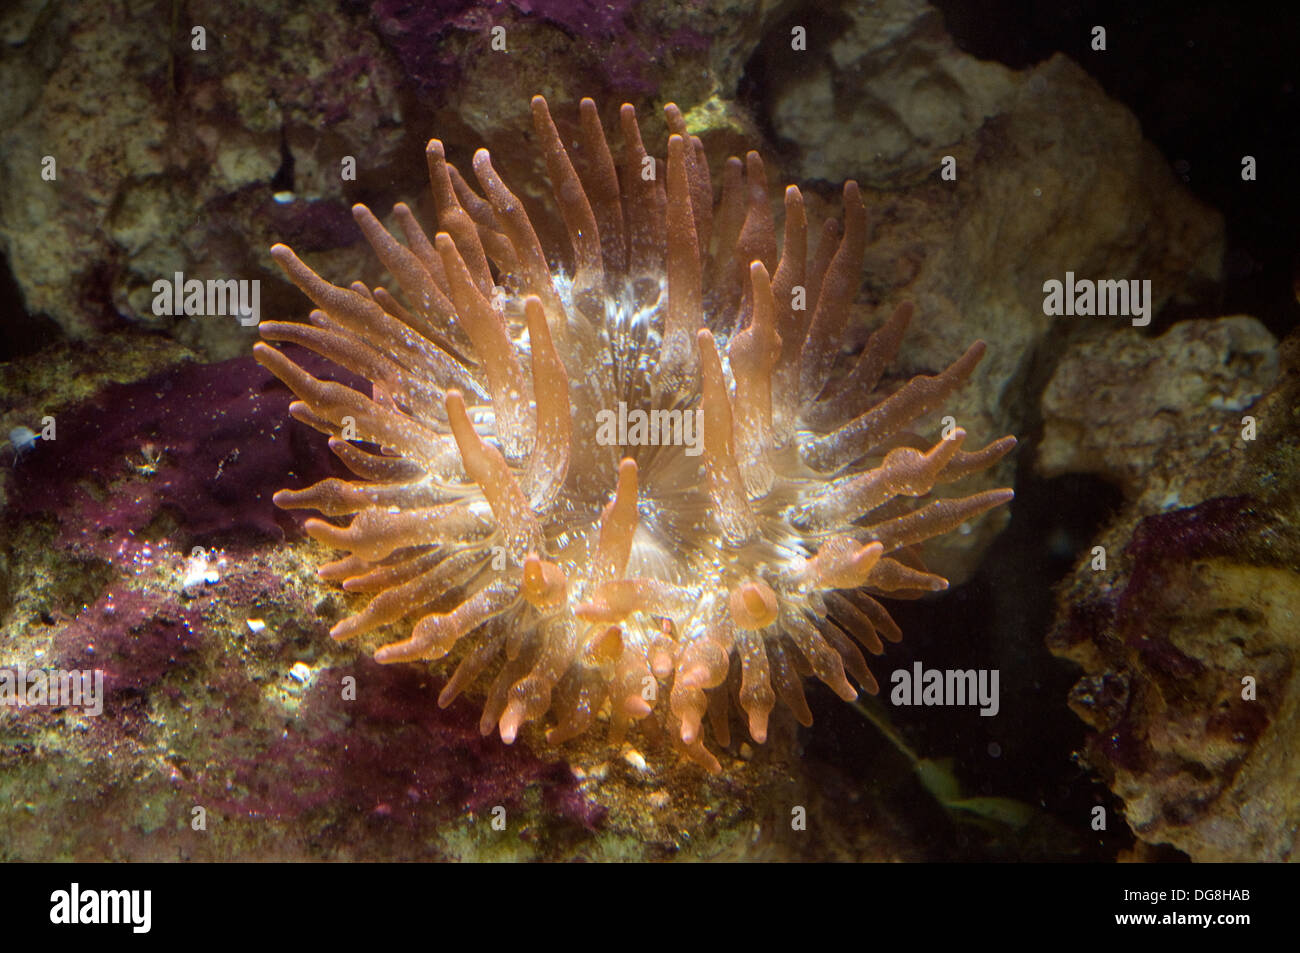 Anemone. Anemone. Sea anemones are a group of water-dwelling, predatory animals of the order Actiniaria. Stock Photo